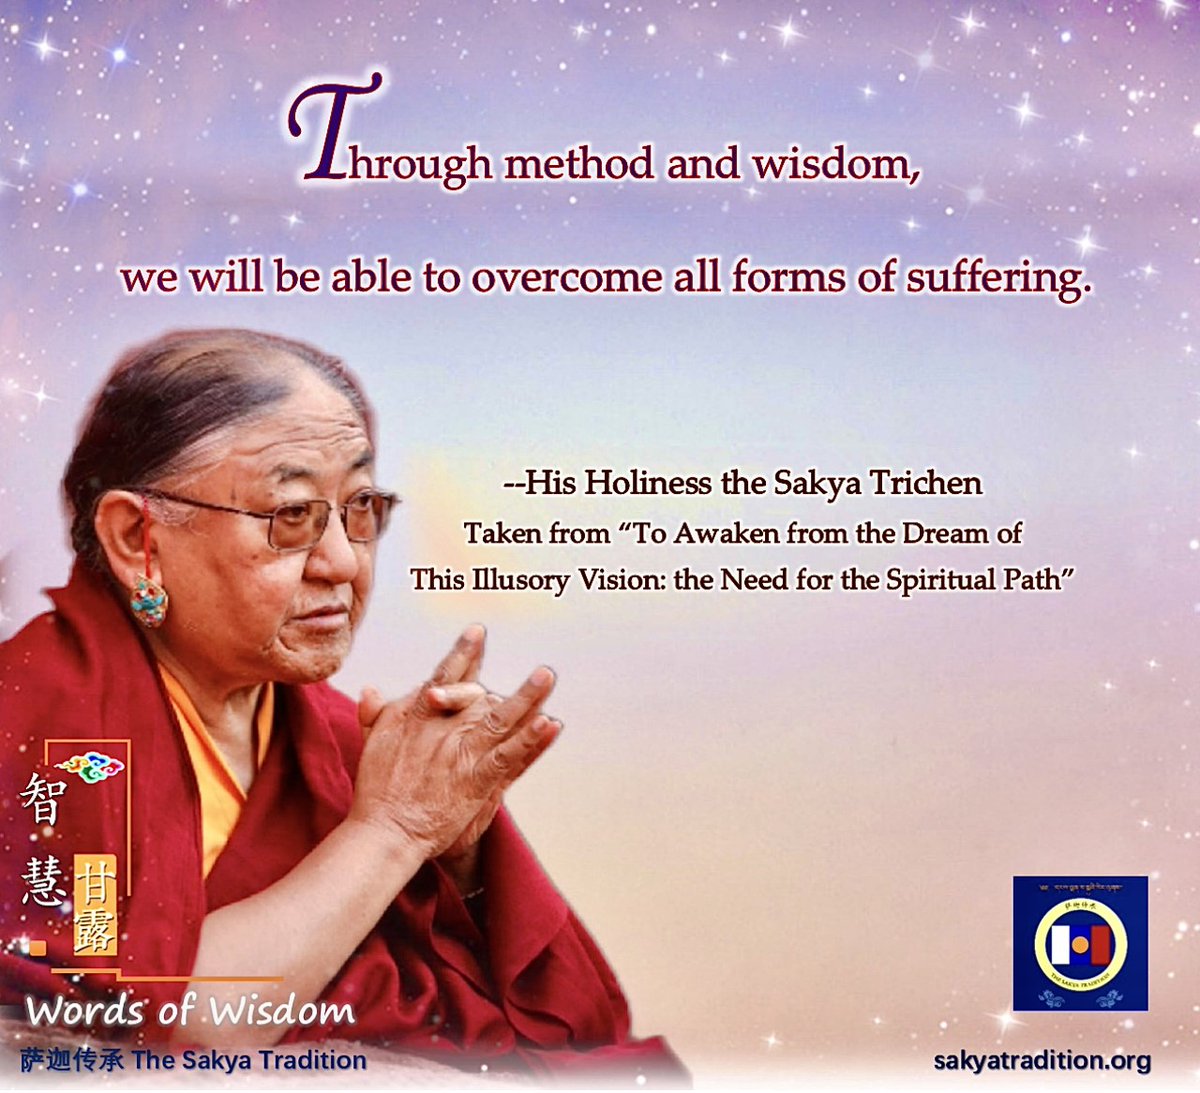 Through method and wisdom, we will be able to overcome all forms of suffering.  --H.H. the Sakya Trichen  
#buddhism #sakya #sakyatrichen #method #wisdom #compassion #buddha #liberation #enlightenment #tibetanbuddhism #sakyatradition 

Source:sakyatradition.org/archived-teach…